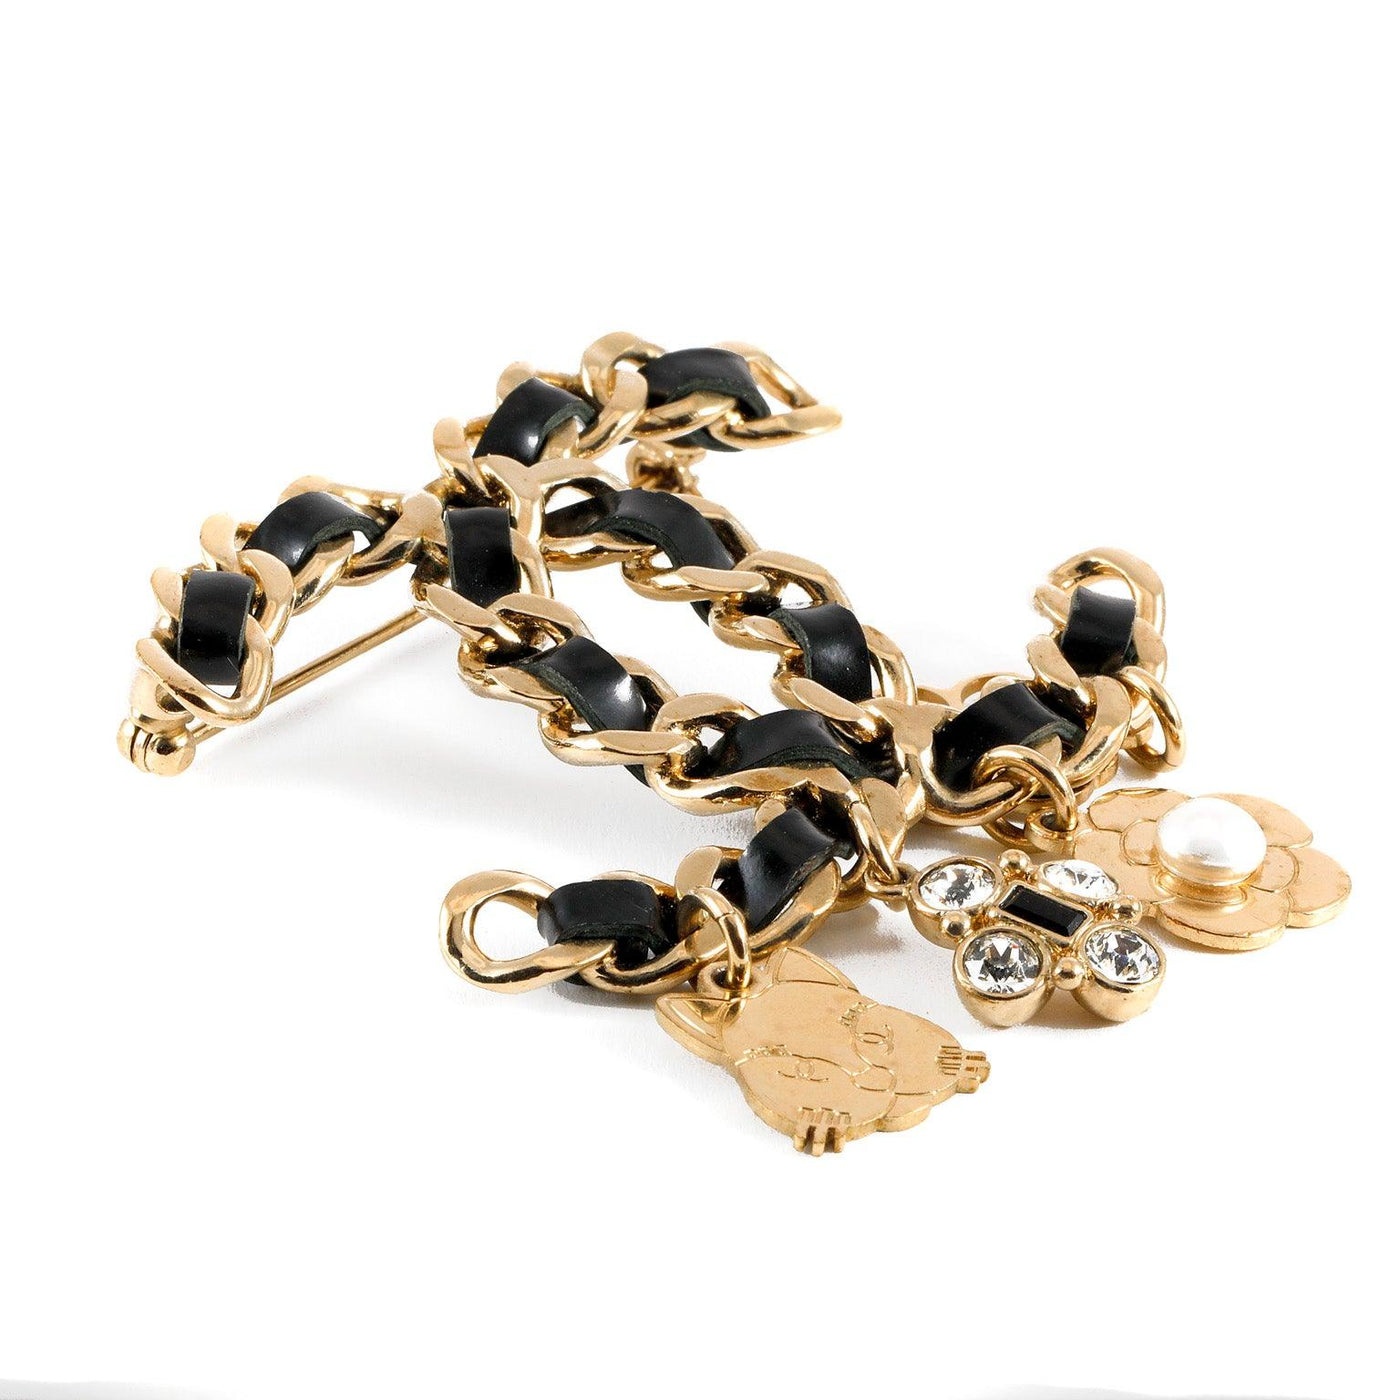 Chanel Black Leather CC Charms Brooch - Only Authentics